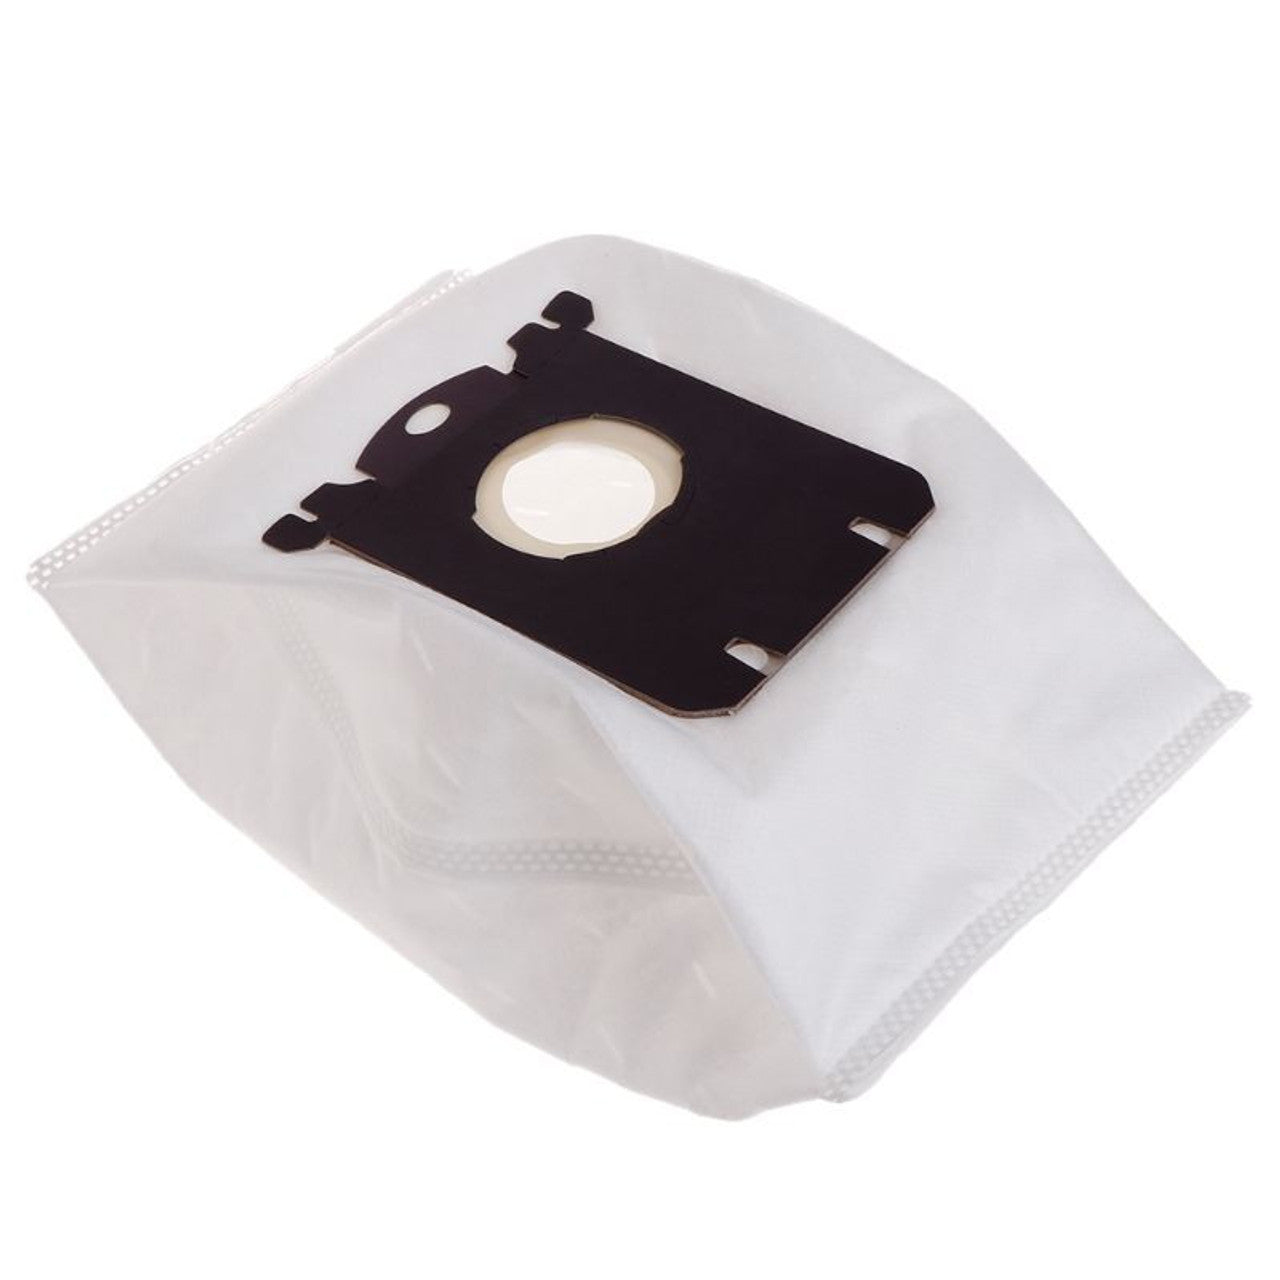 5 x Vacuum Cleaner Bags for Electrolux Silent Performer Range